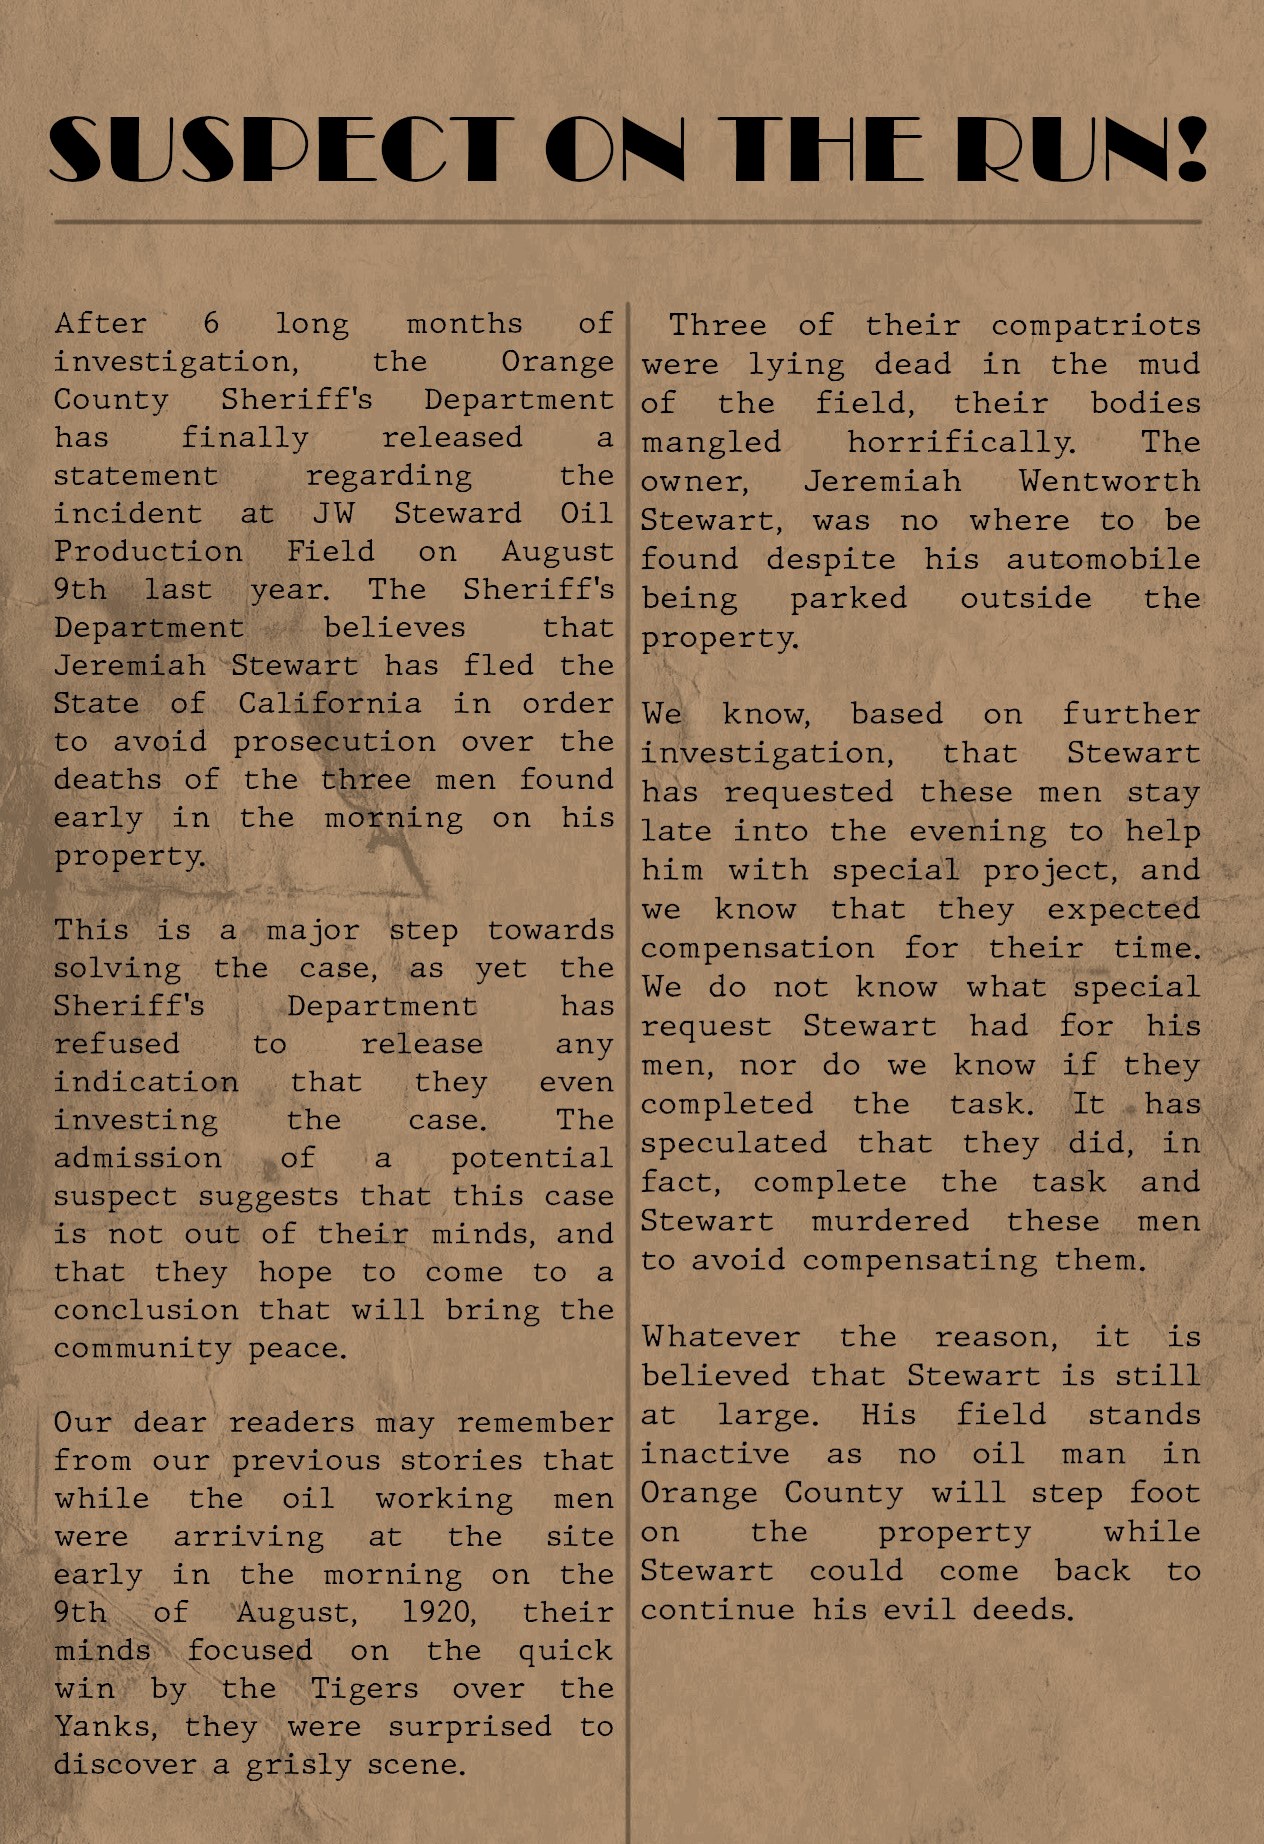 February 1921 News clipping